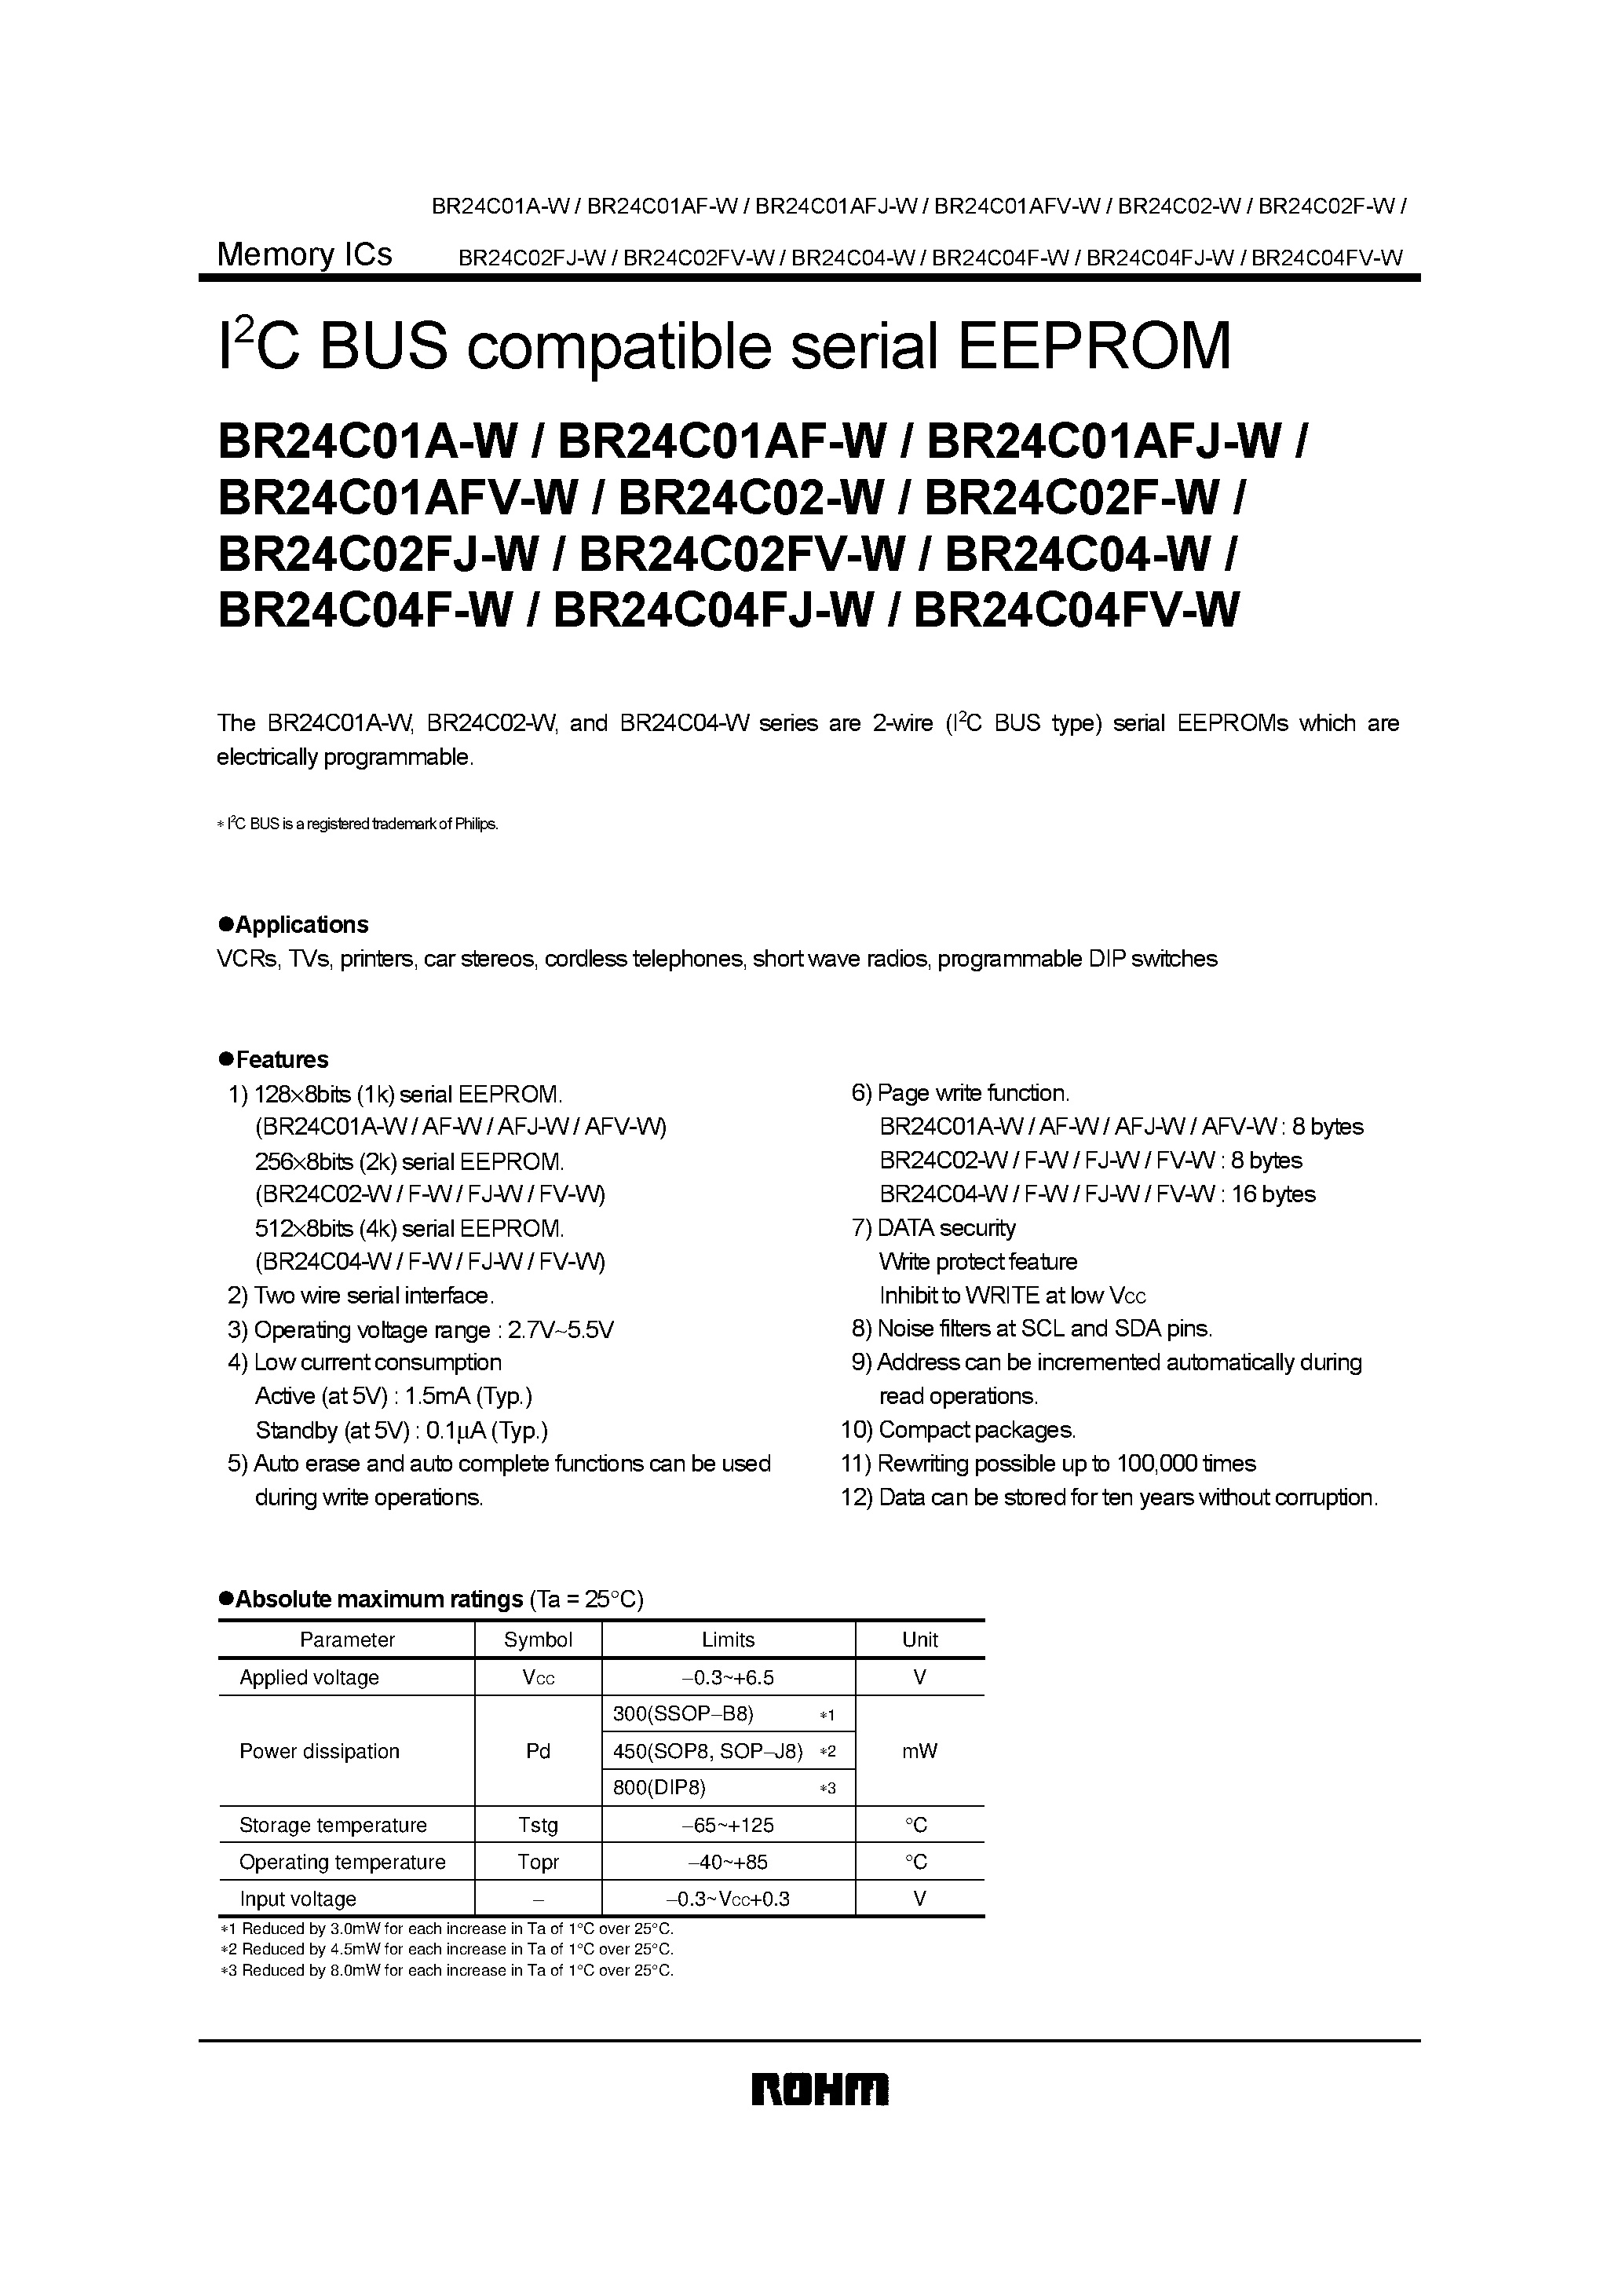 Datasheet BR24C04-W - I2C BUS compatible serial EEPROM page 1